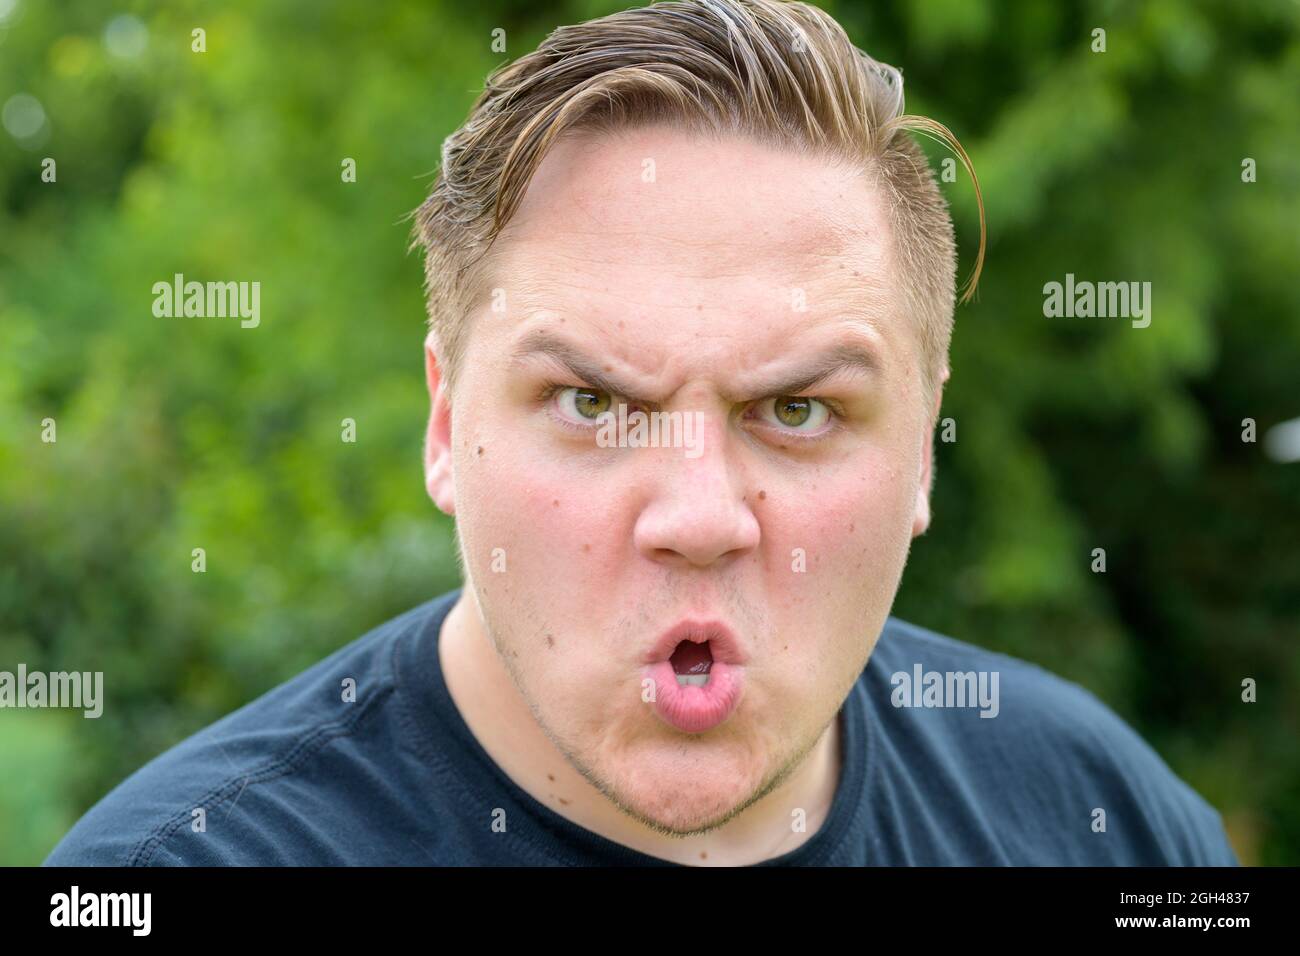 Angry aggressive young man shouting at the camera with a threatening expression in a close up on his face outdoors against greenery Stock Photo